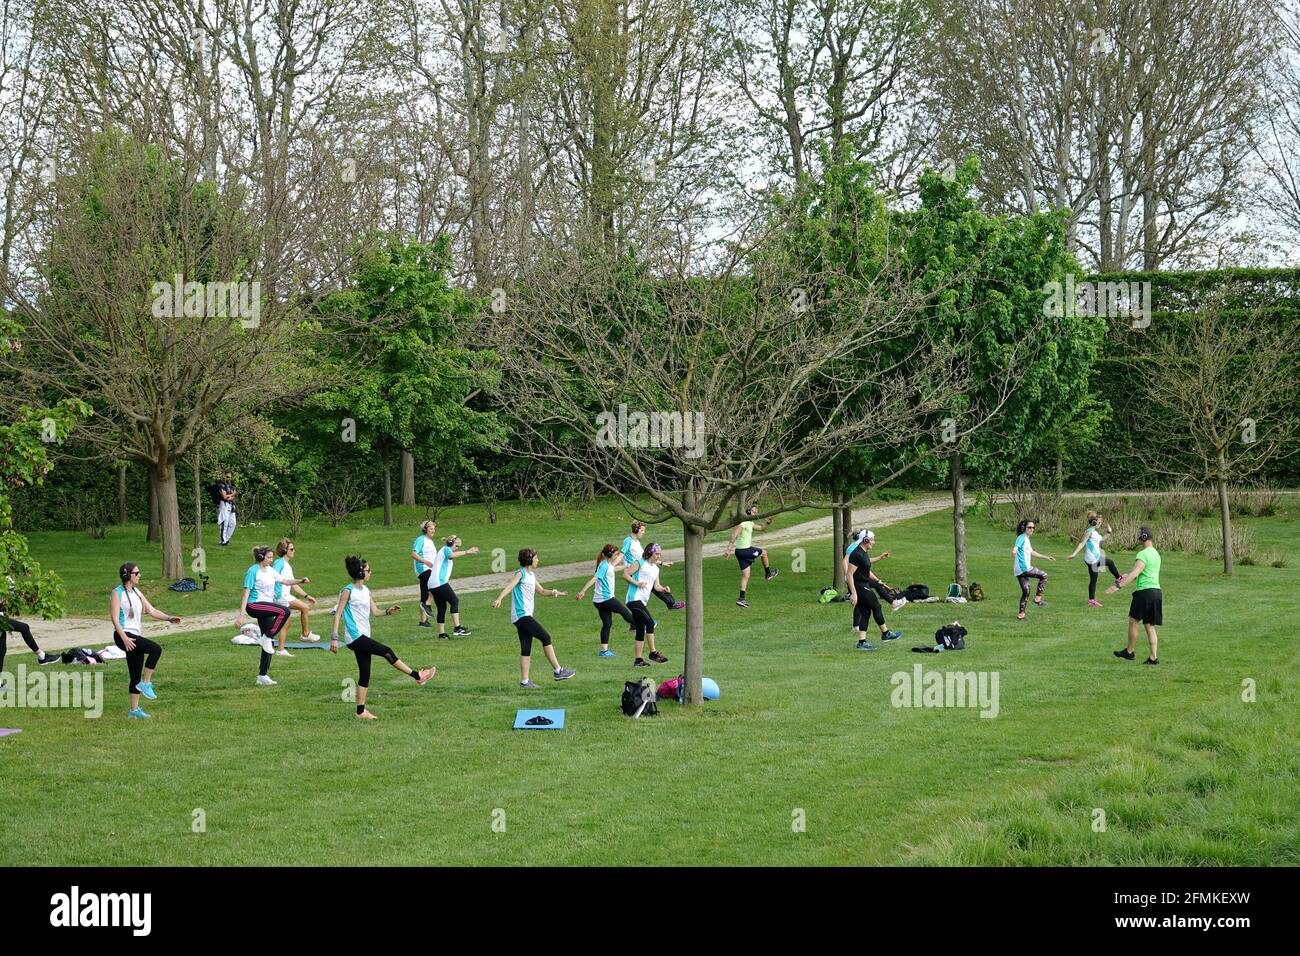 Training outdoors. Open air. People doing group exercise in the park keeping distance from each other. Social distancing after covid-19 coronavirus qu Stock Photo